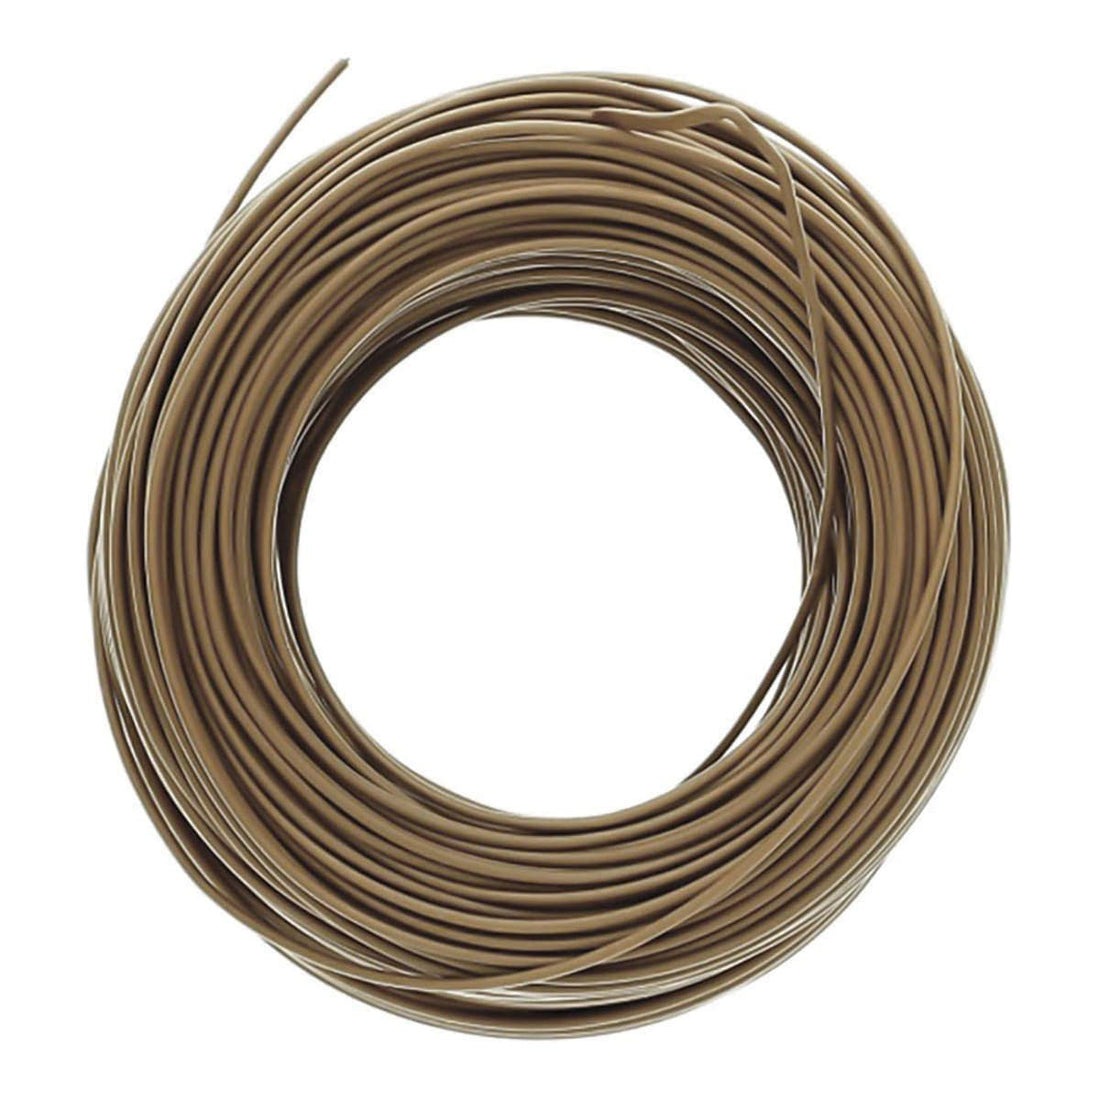 FS18 CABLE 3x1.5 10MT BROWN - best price from Maltashopper.com BR420200139